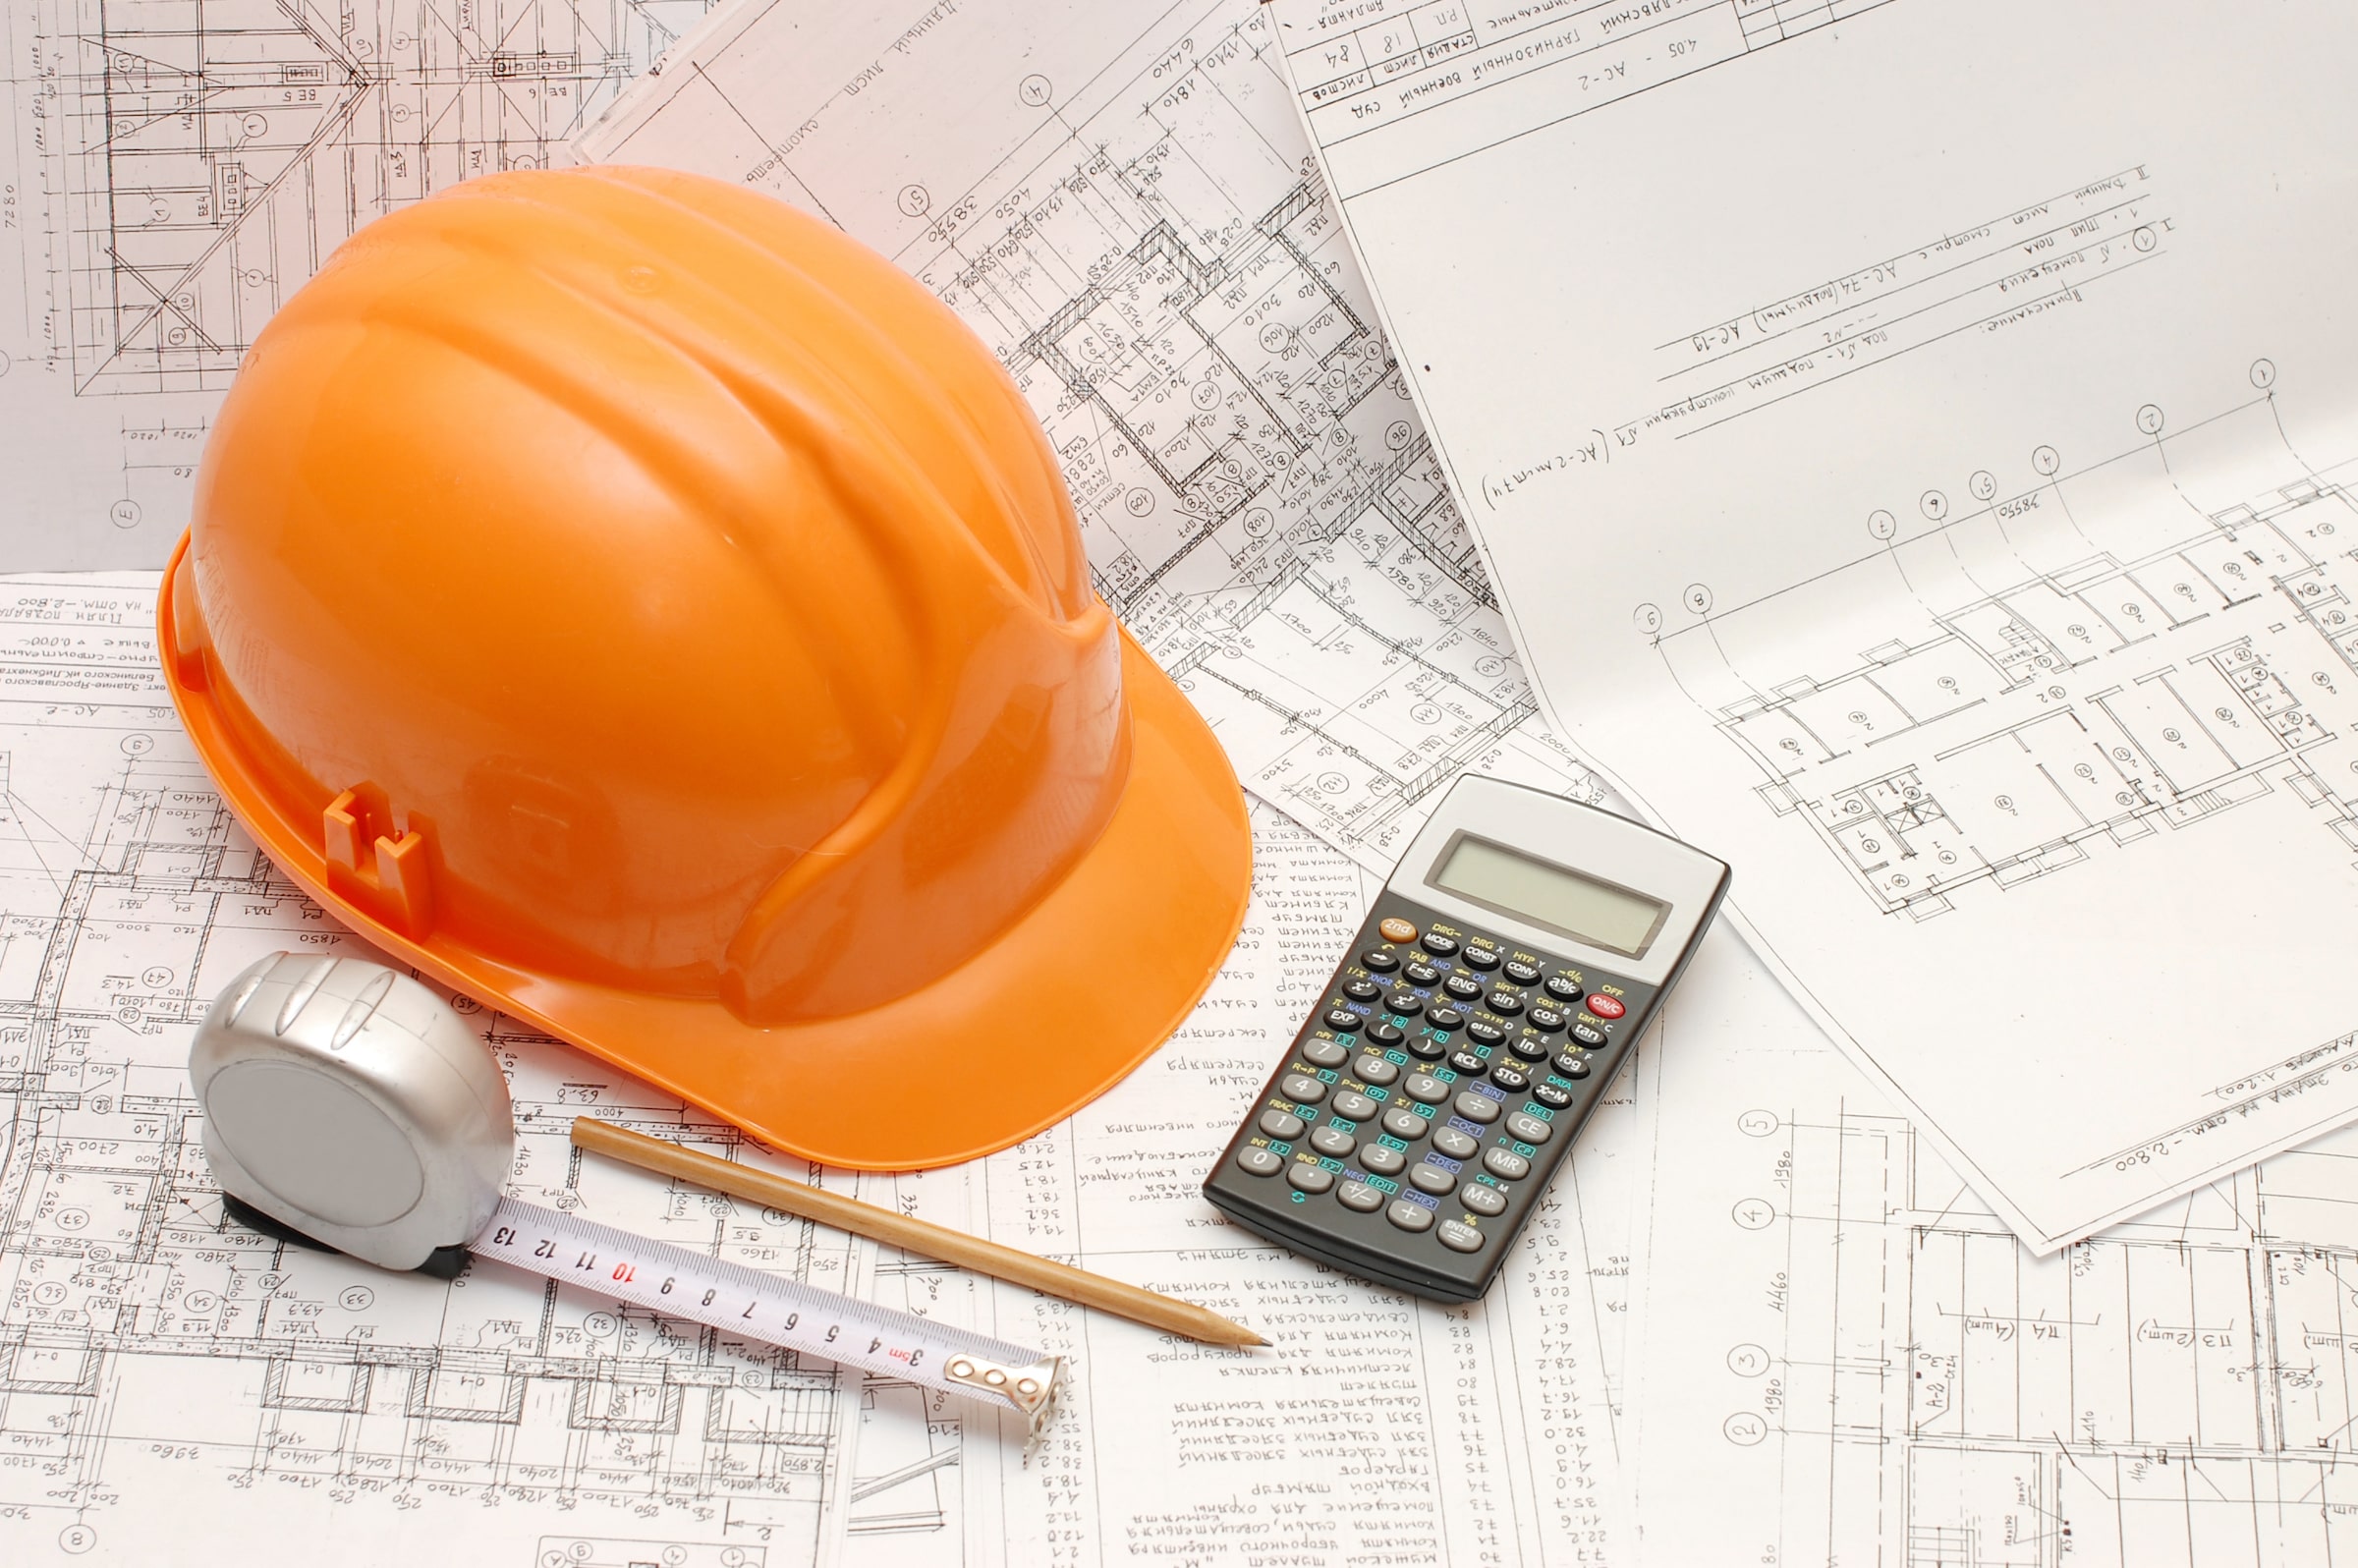 Hard hat with calculator and pencil